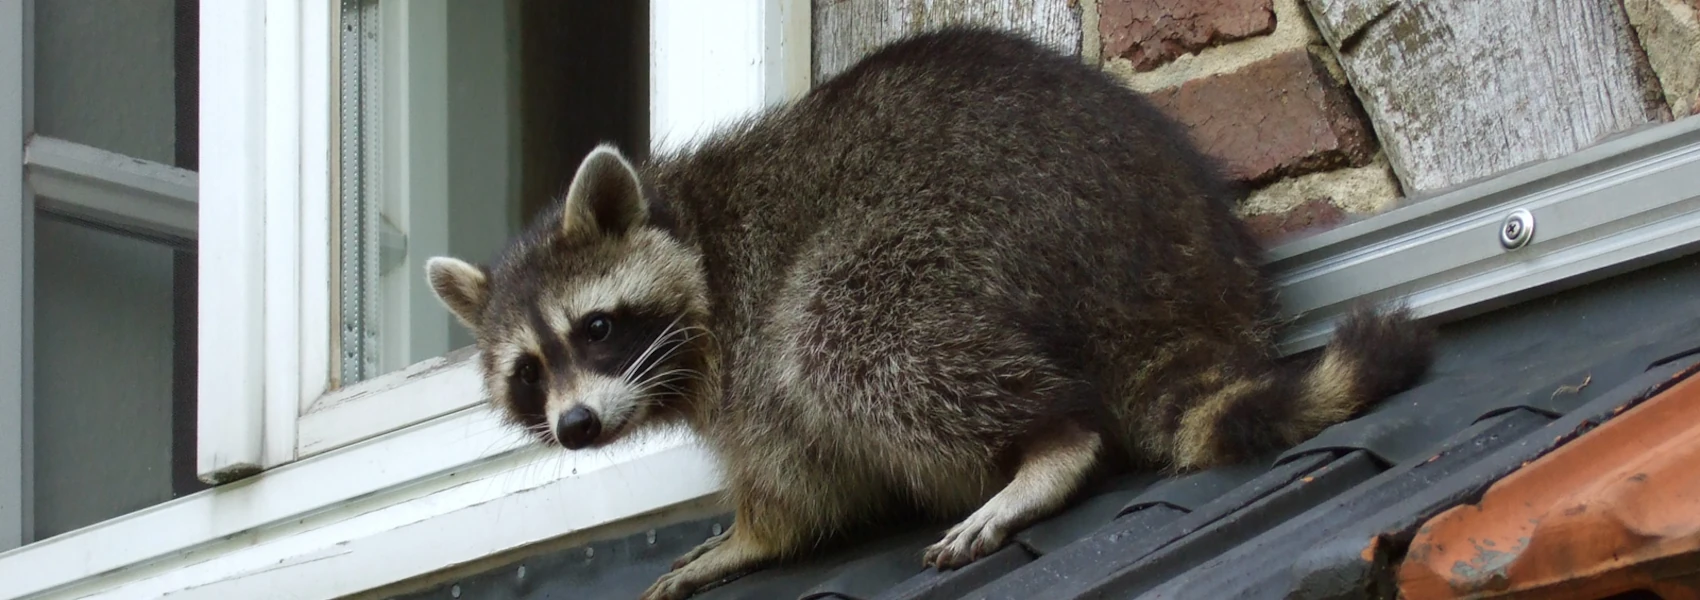 A raccoon crouches on a tiled roof near an open window, and looks back down at the photographer.